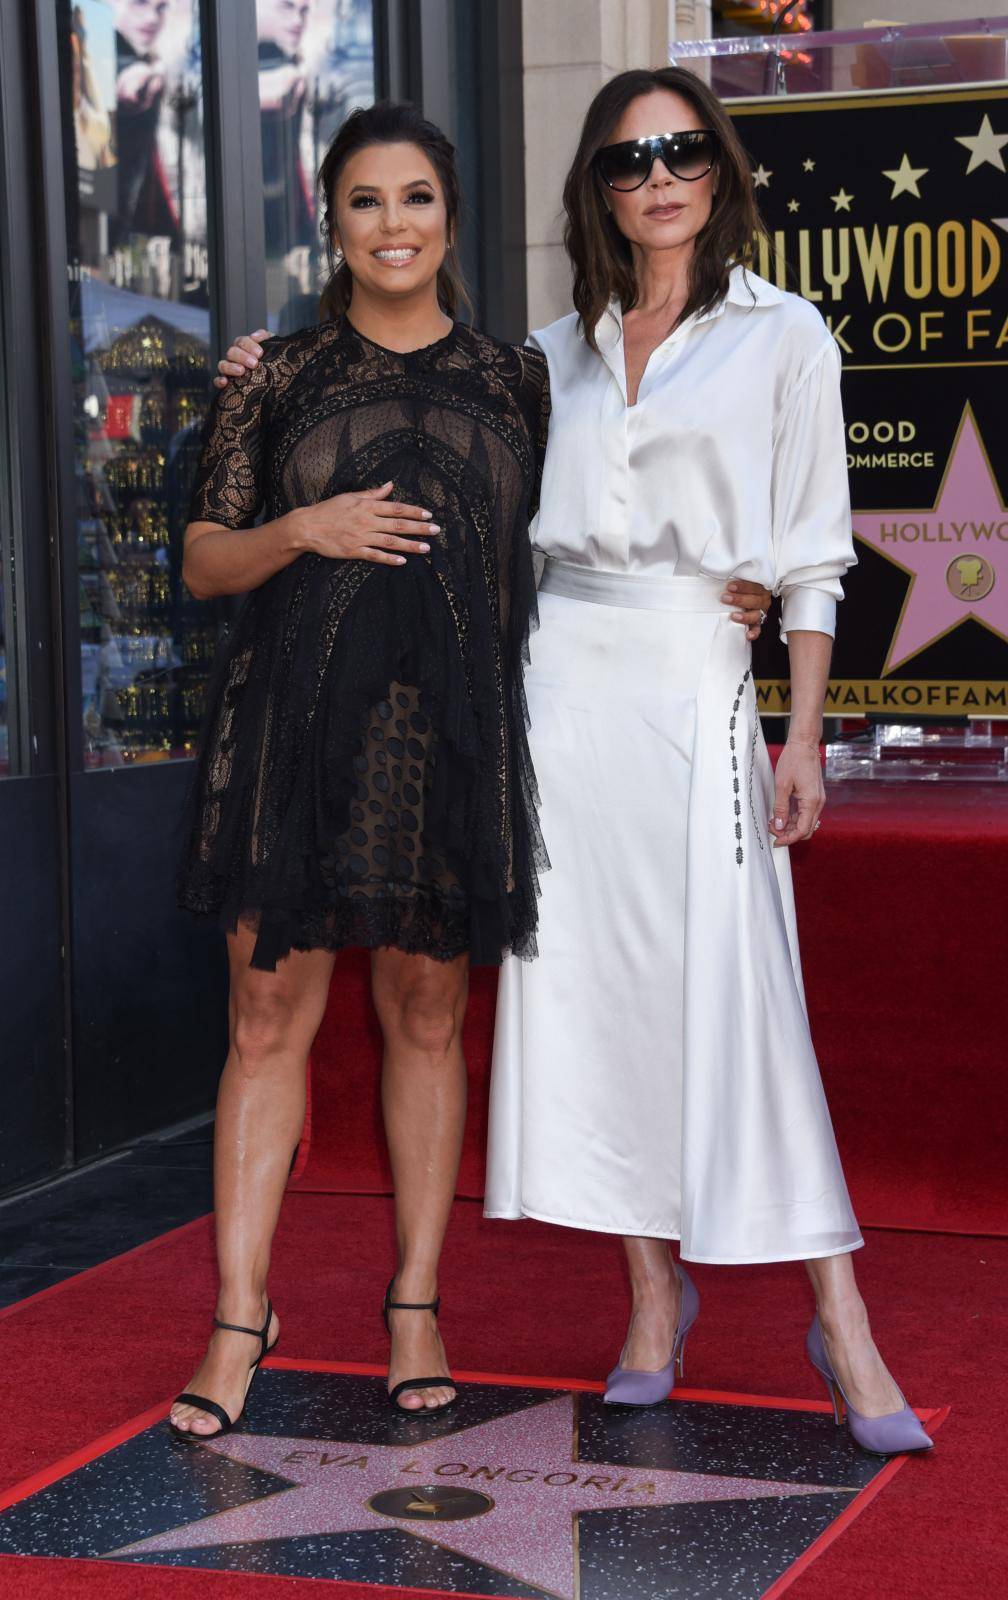 Eva Longoria Honored With Star On The Hollywood Walk Of Fame Ceremony - Los Angeles